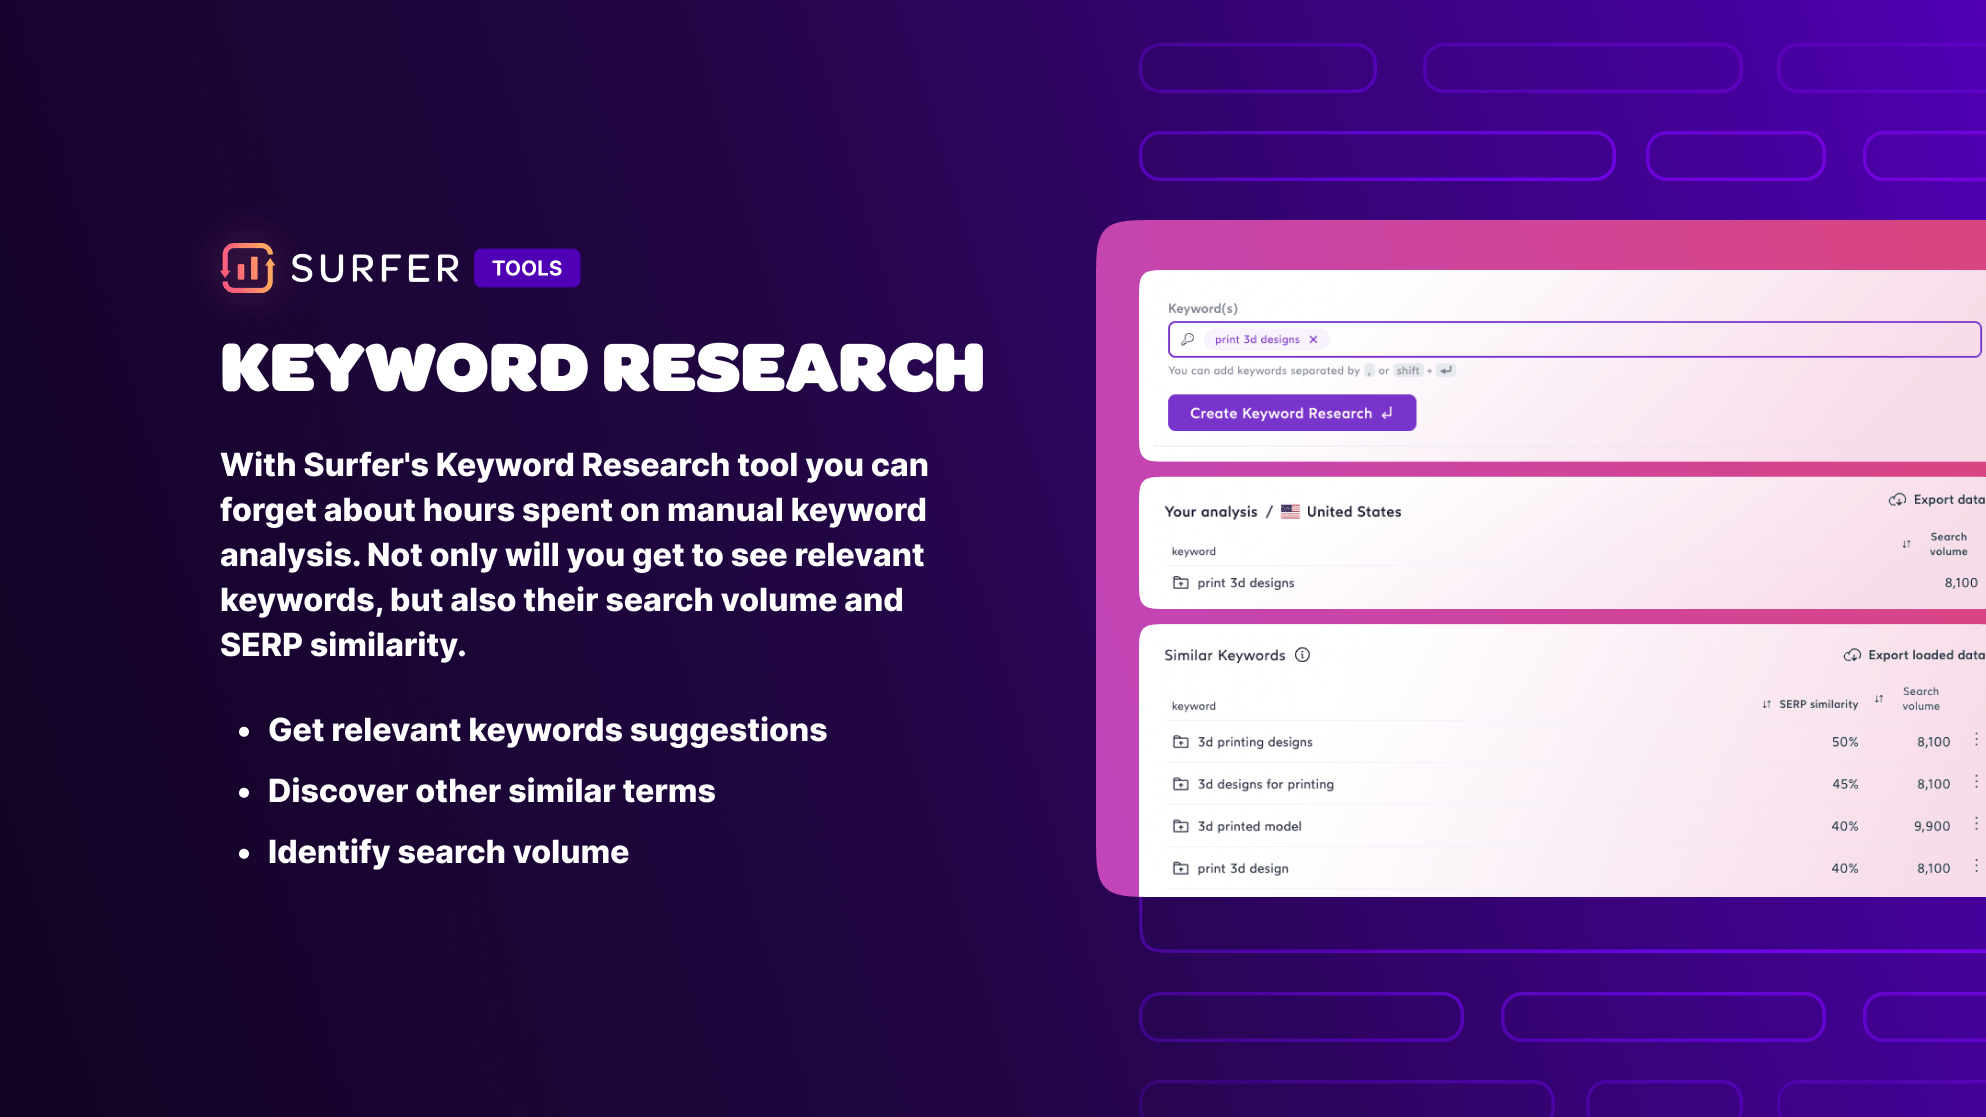 the keyword research page is displayed on a purple background.